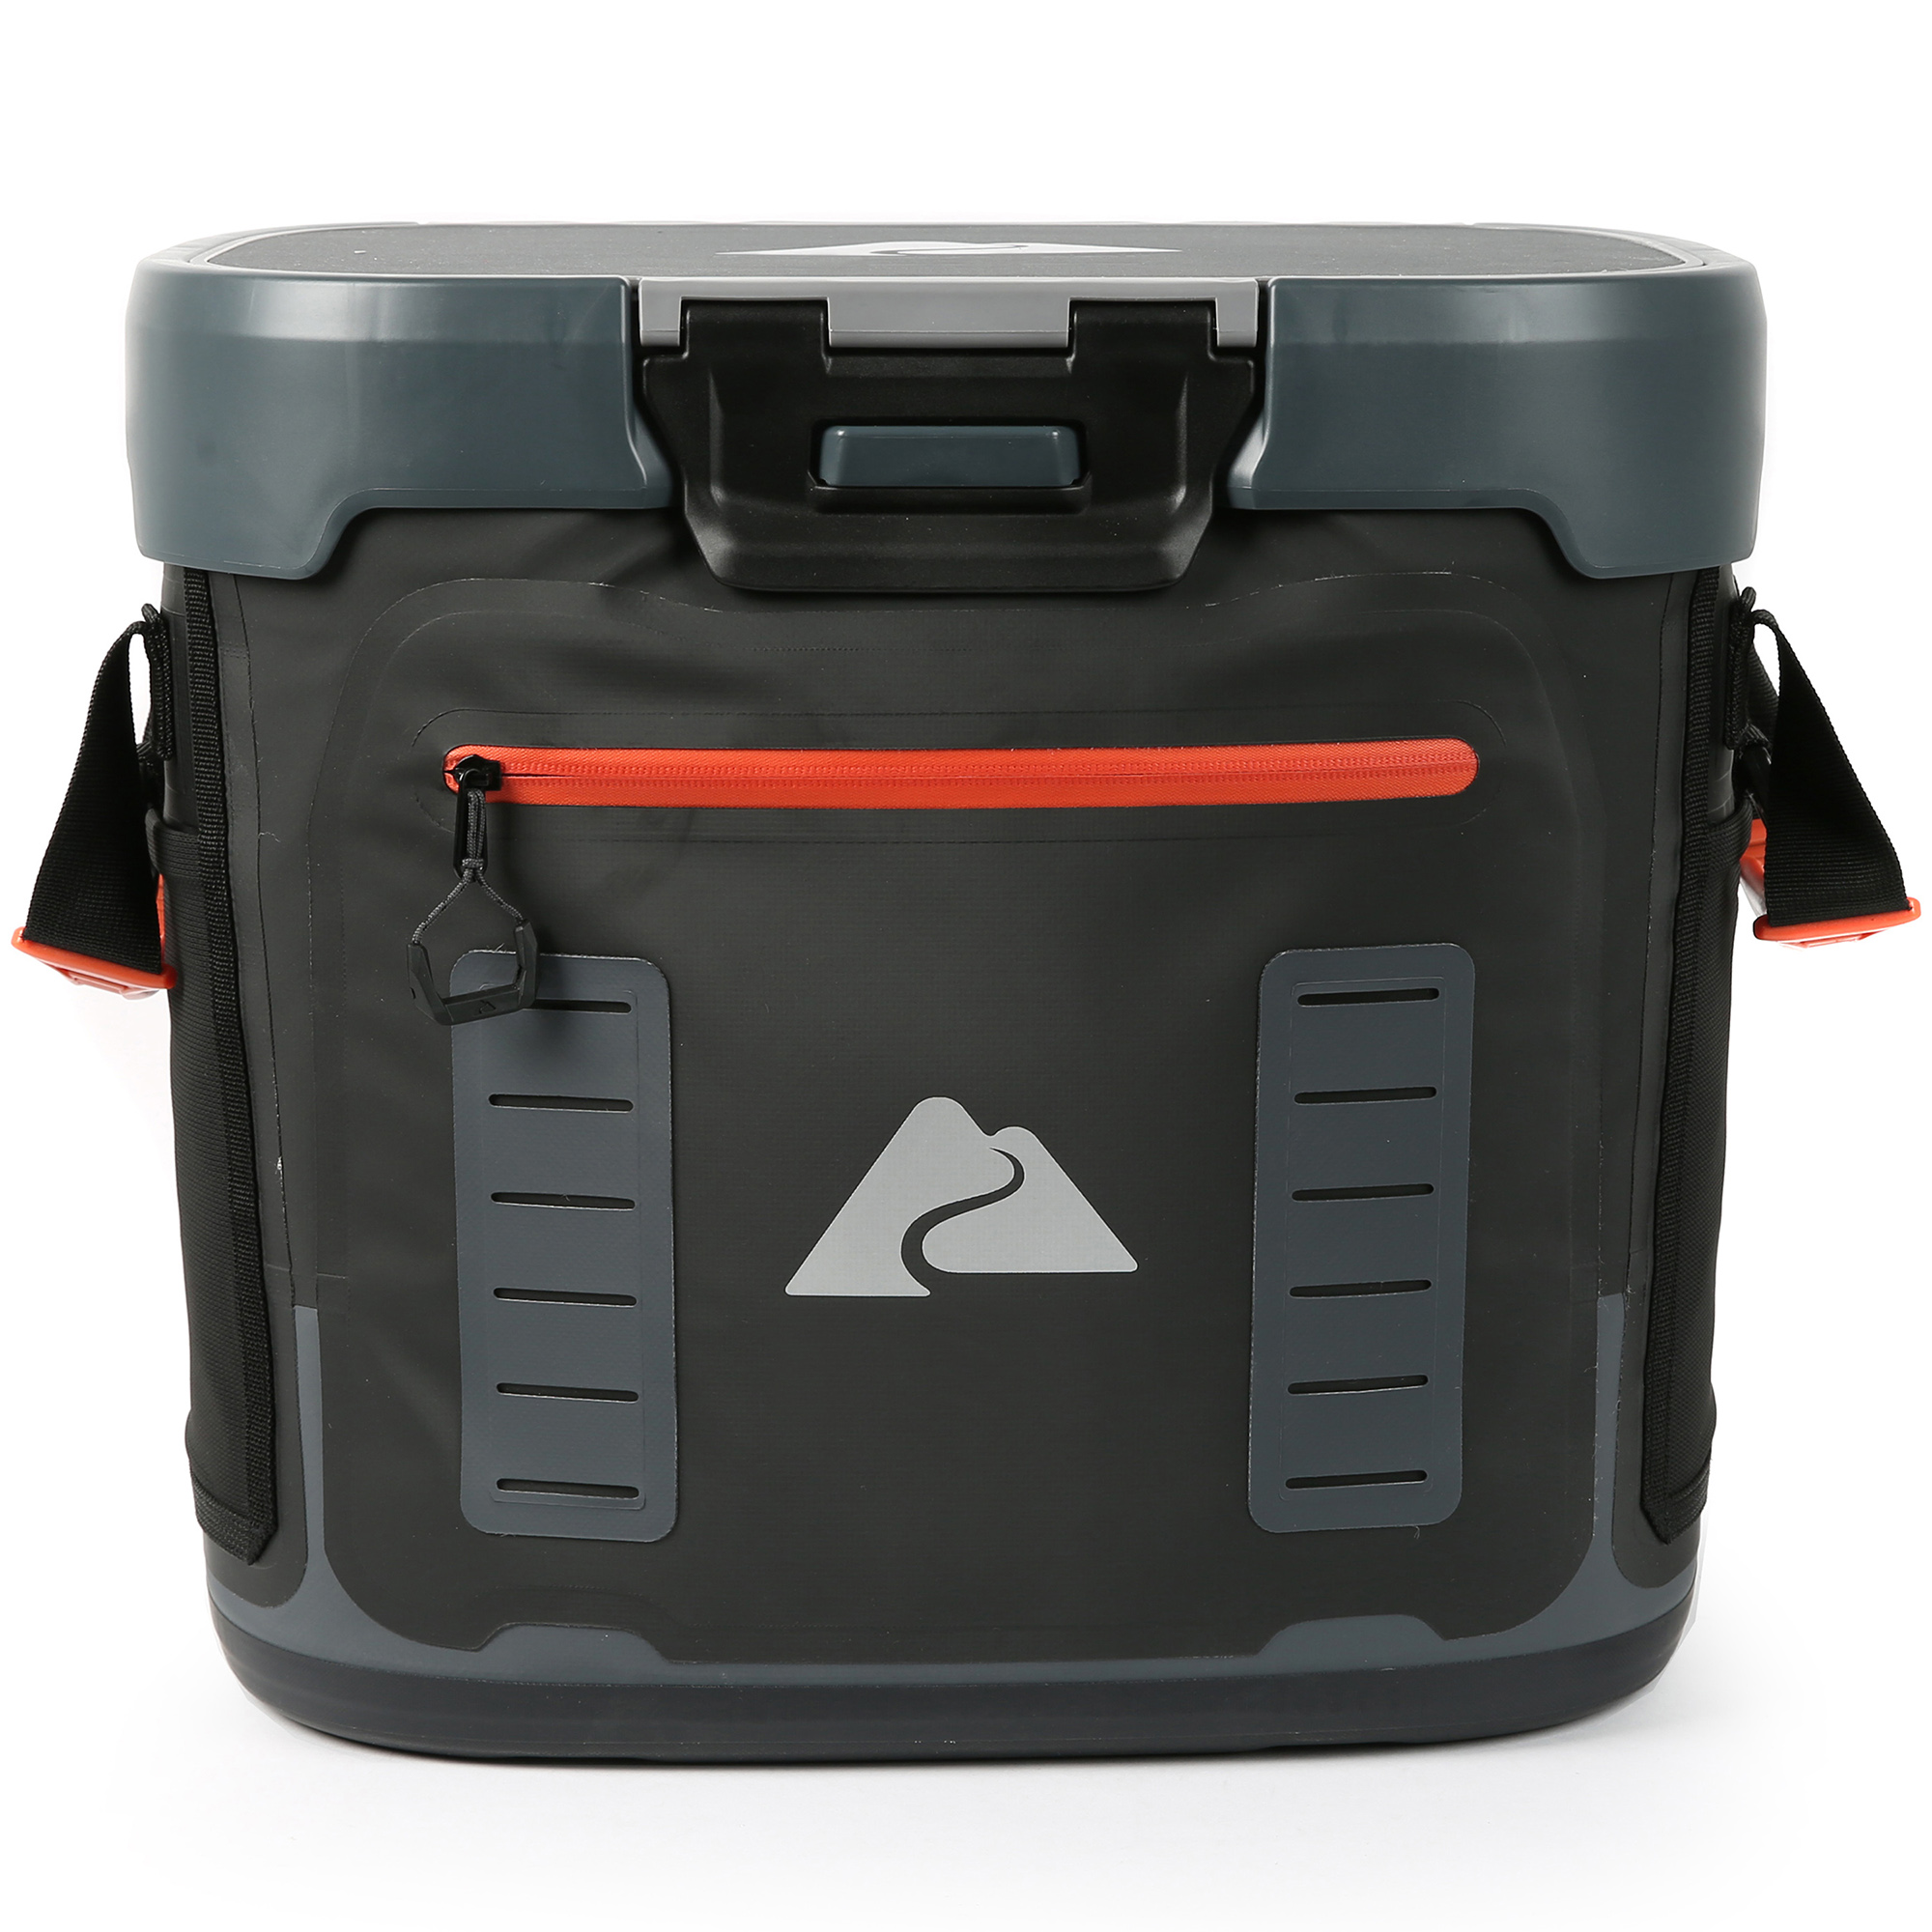 Ozark Trail 36 Can Welded Cooler, Leak-Proof Cooler with Microban®, Black - image 1 of 17